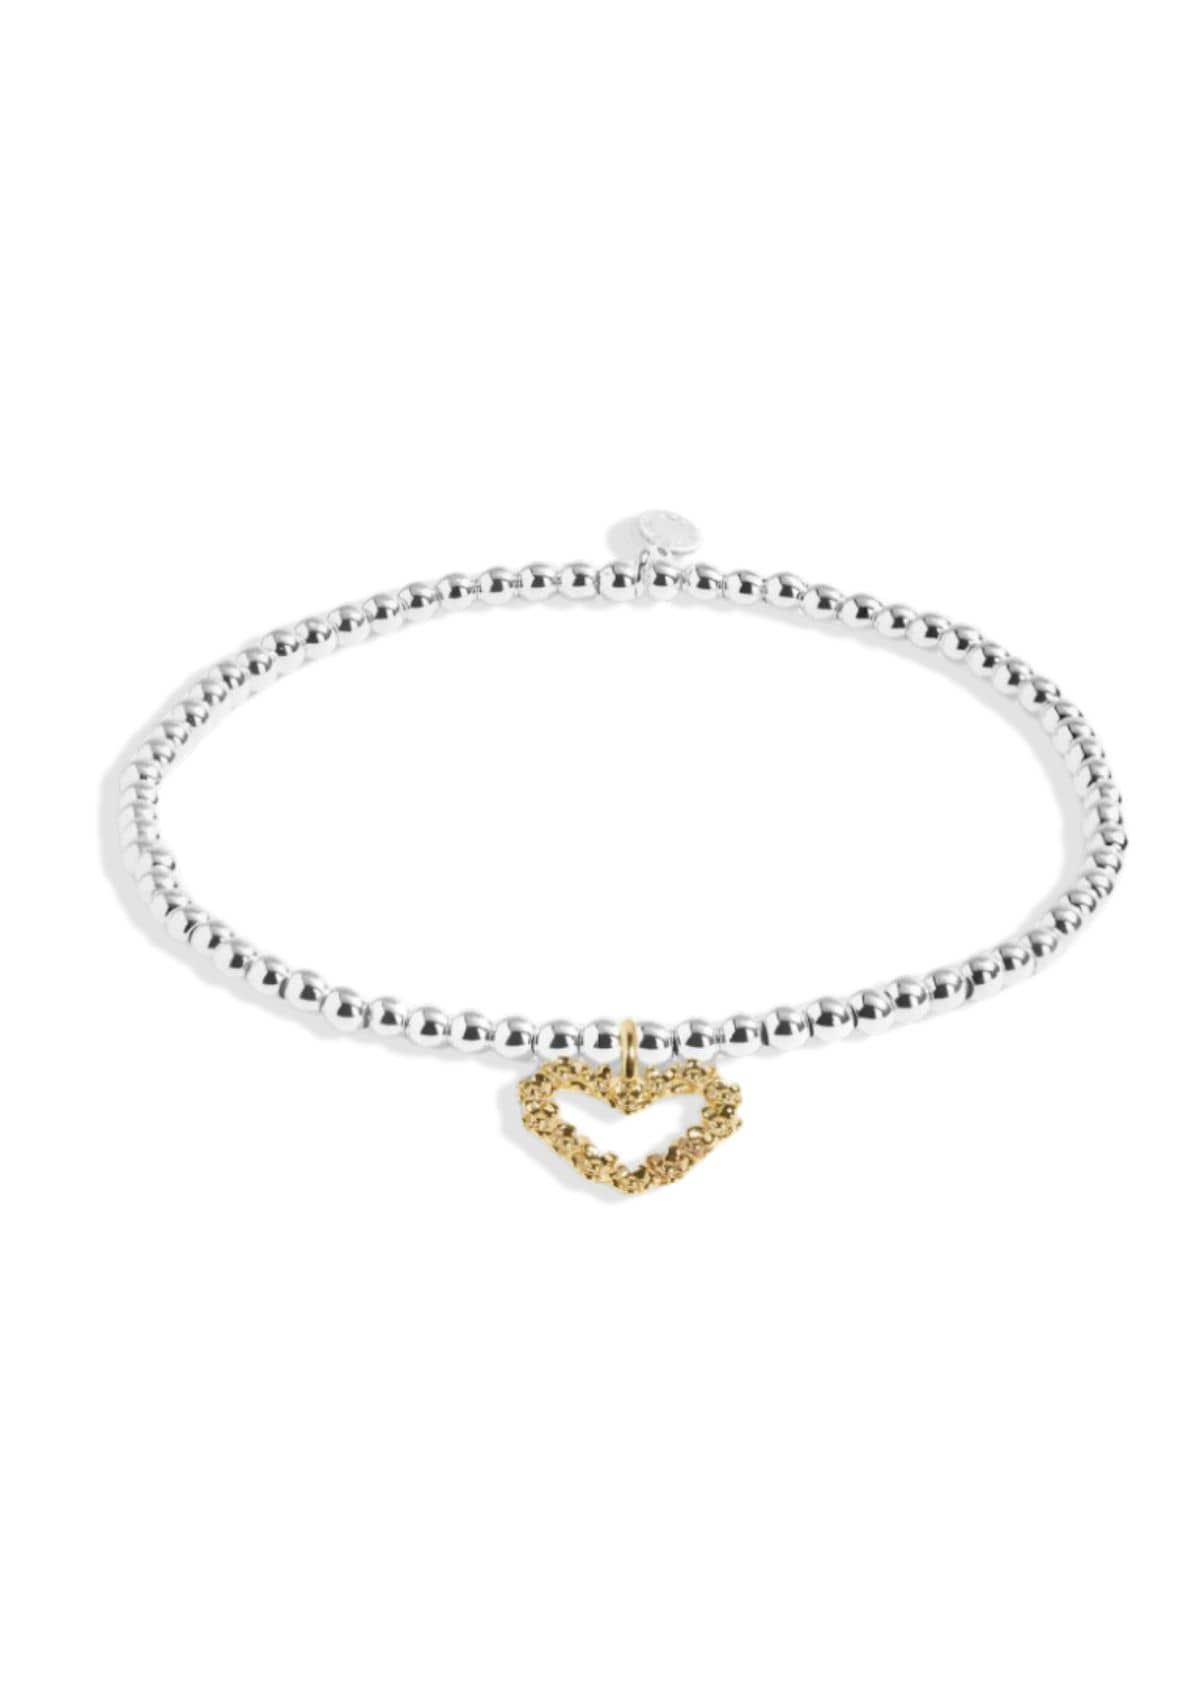 "Blushing Bride" Silver and Gold Bracelet -A Littles & CO- Ruby Jane-